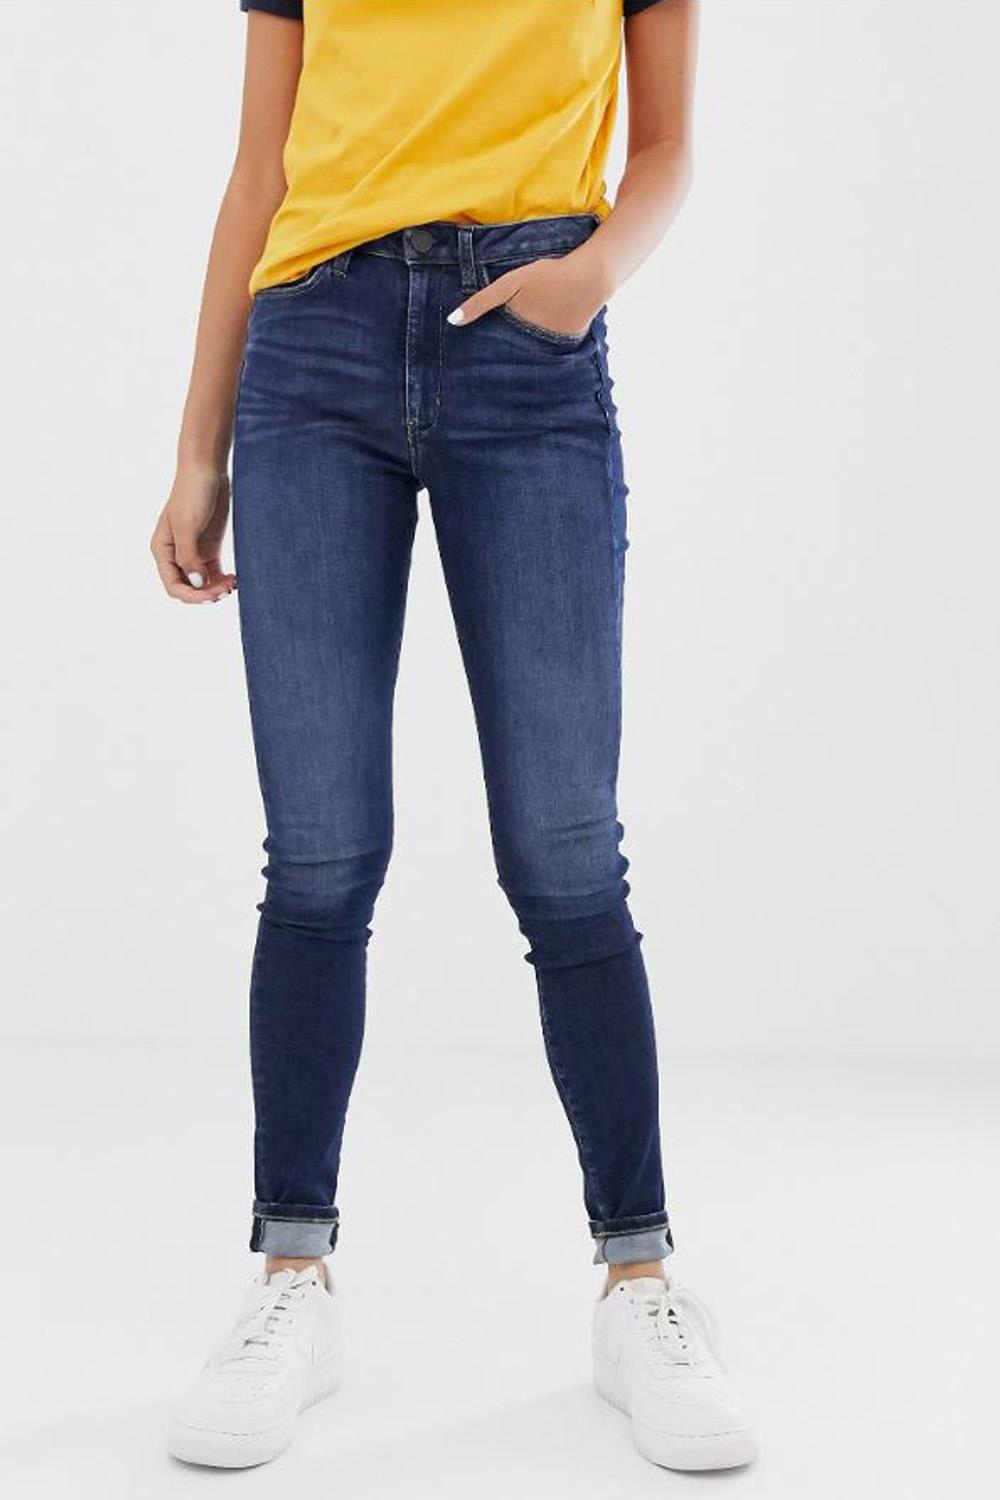 pantalones diario Tommy Jeans, 94,99€